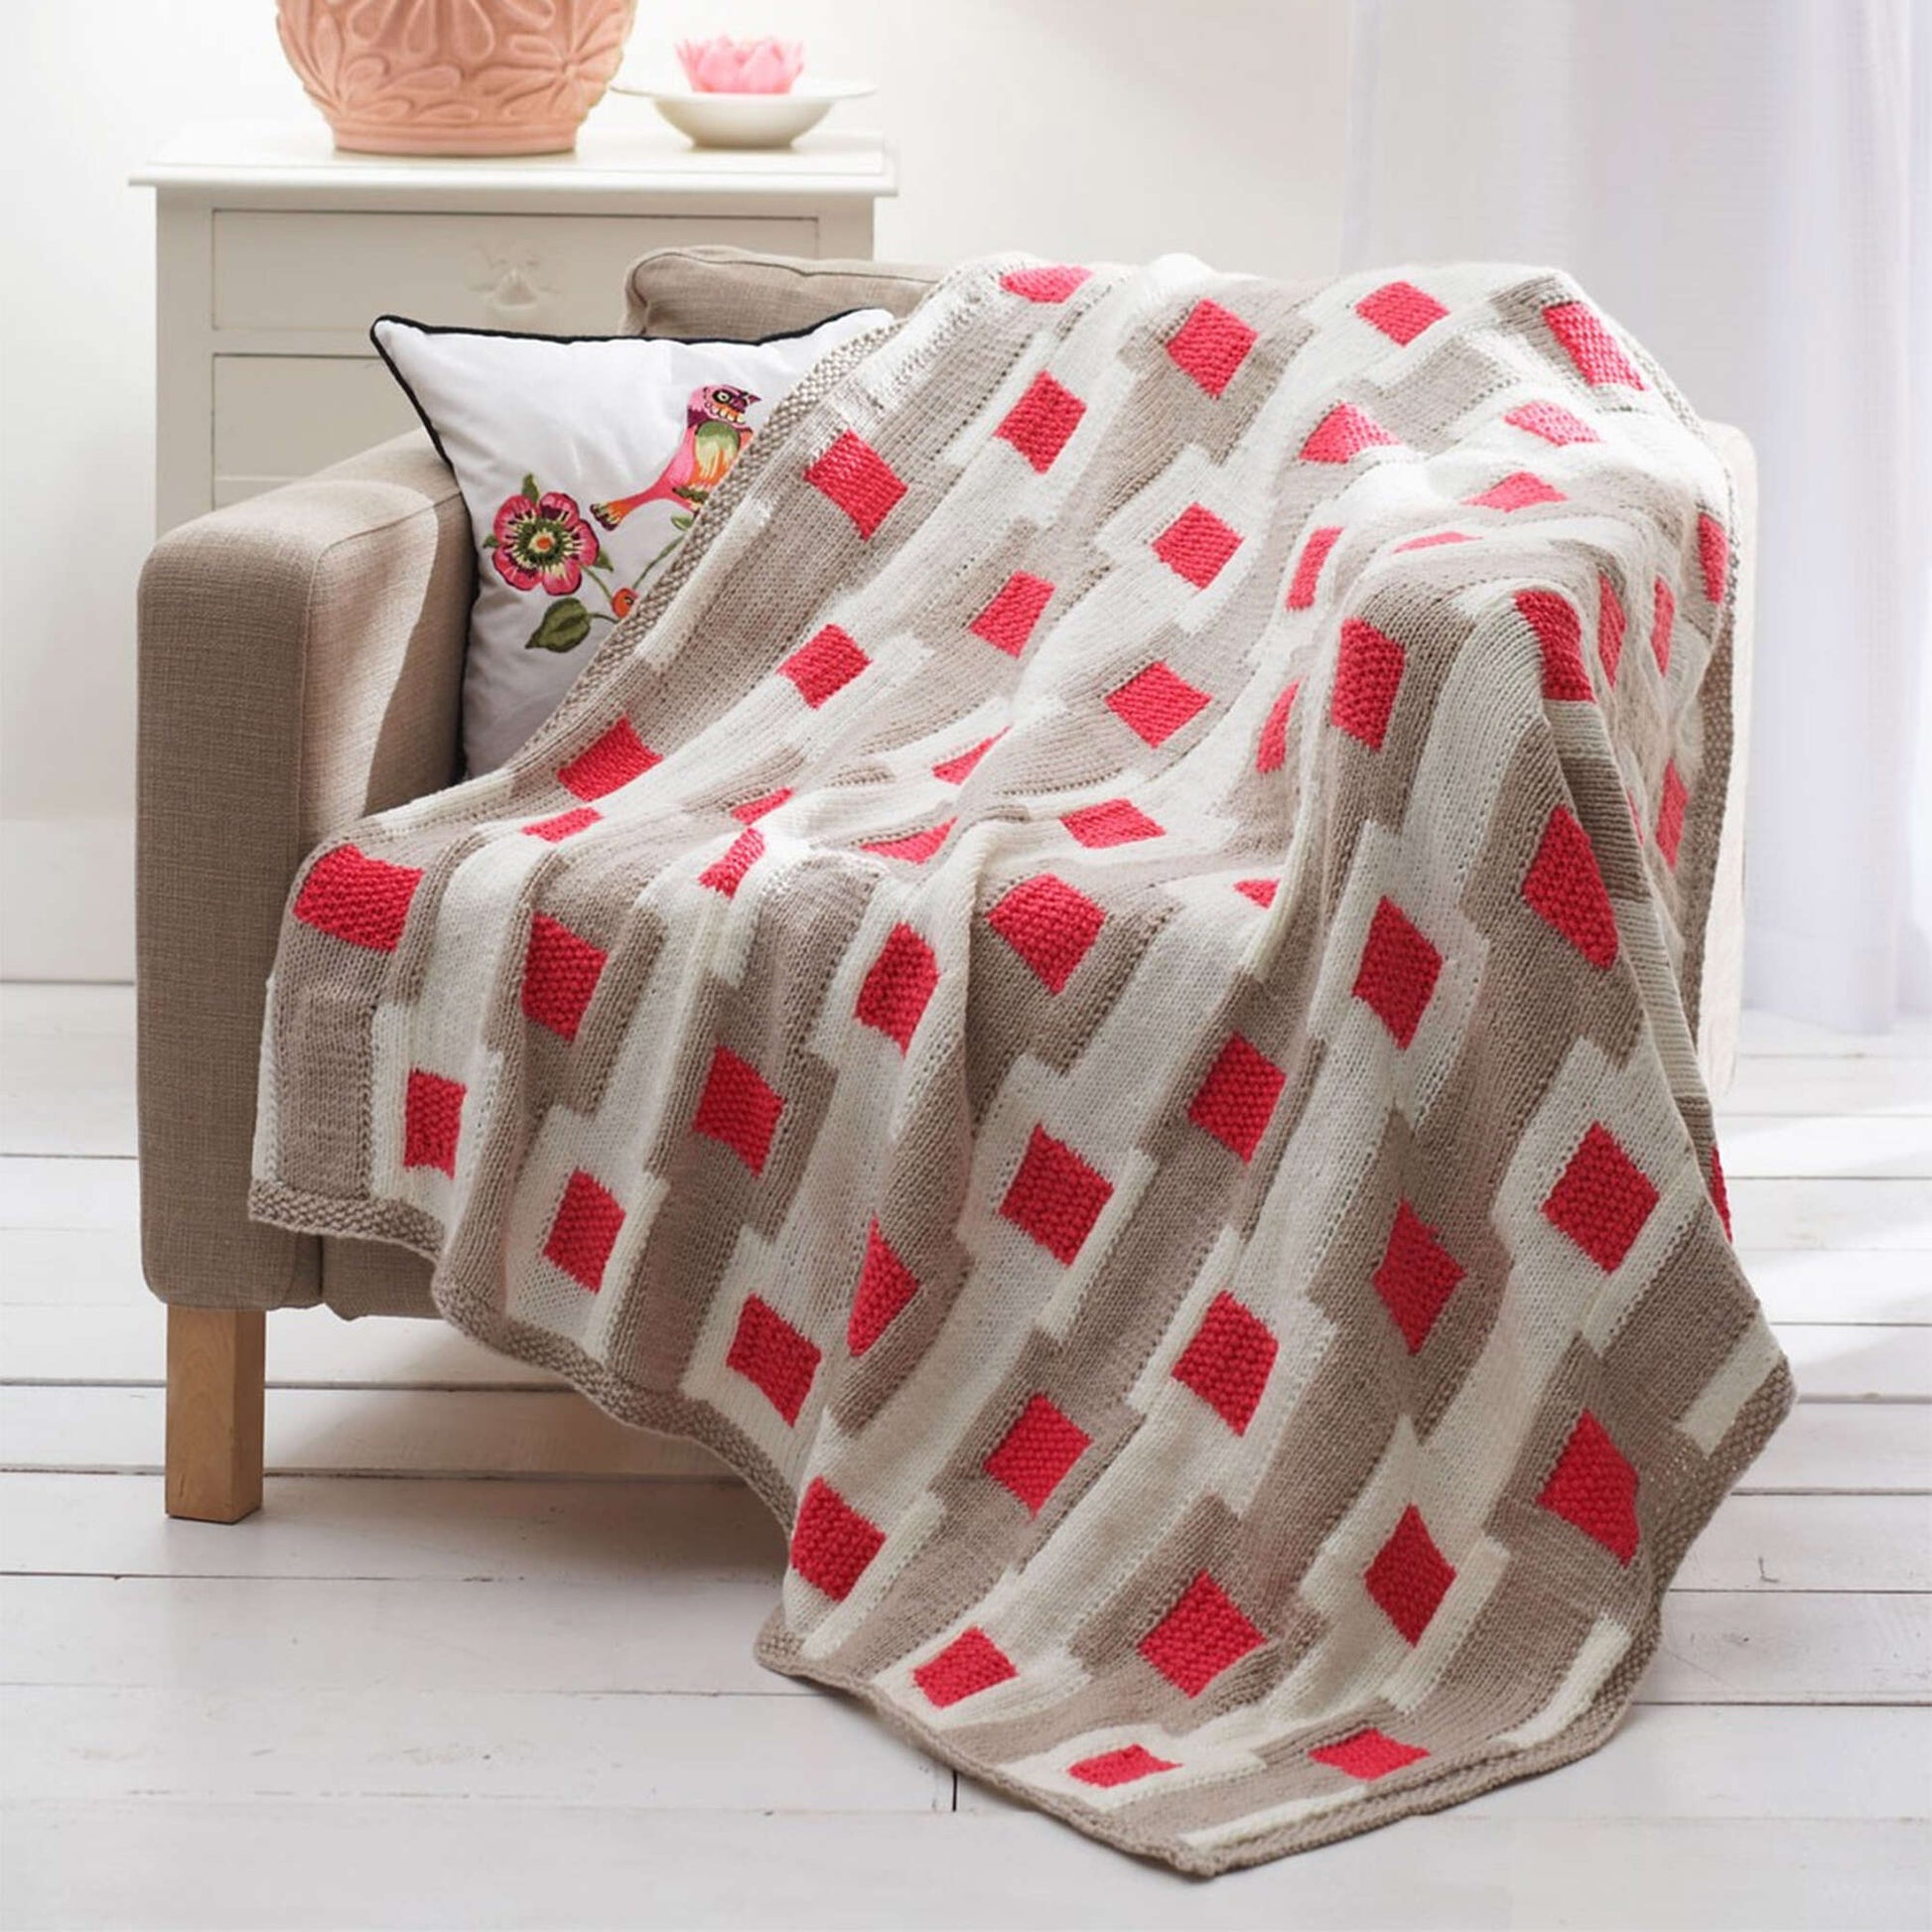 Free Bernat Knit Graphic Gridwork Afghan And Pillow Pattern